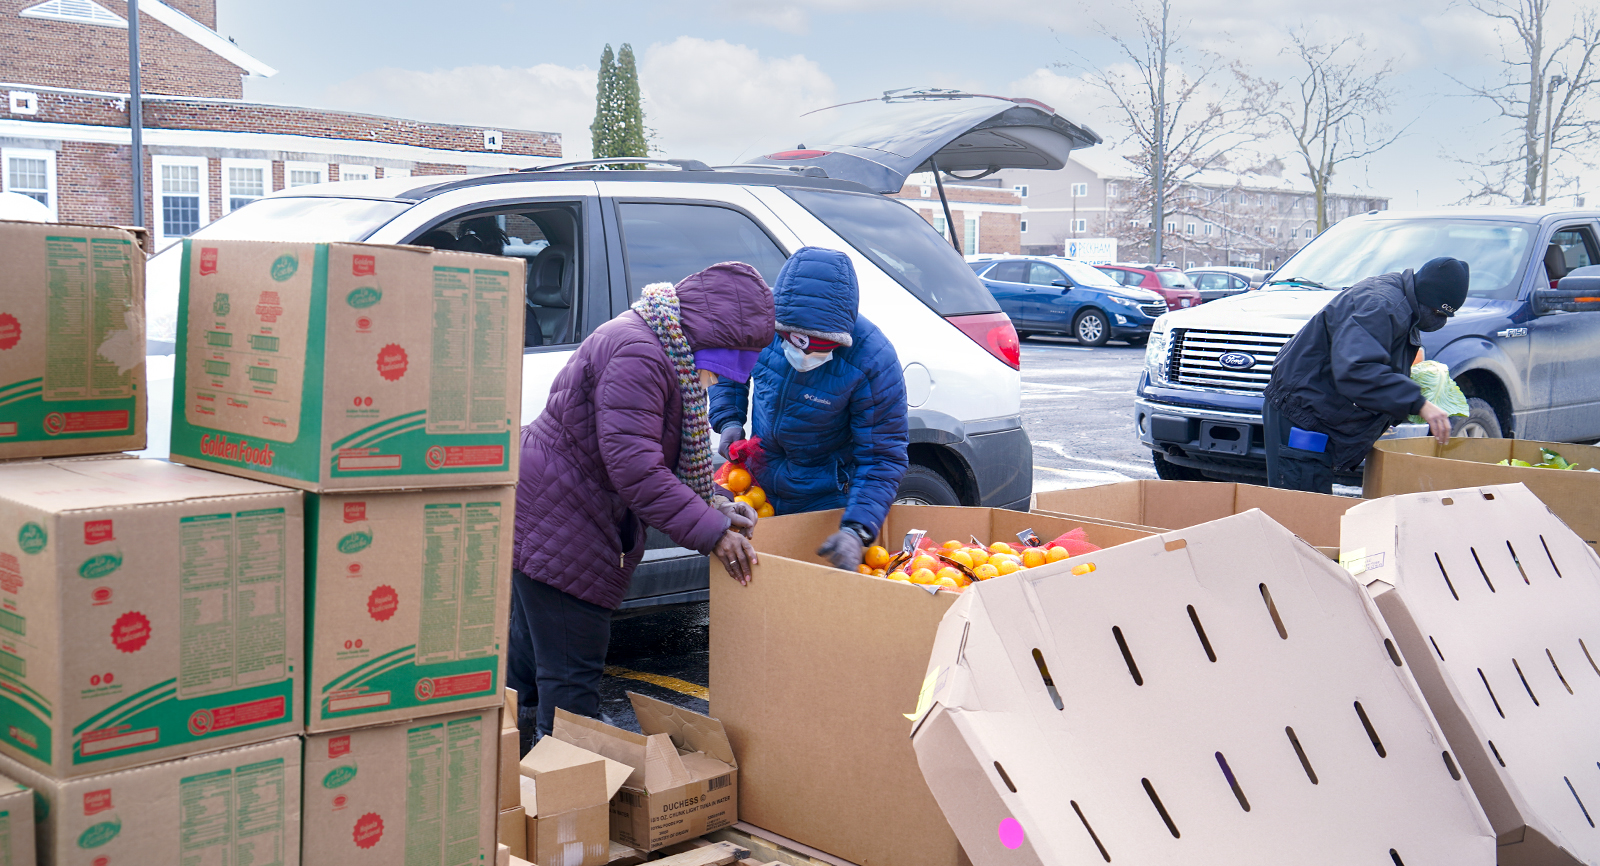 Volunteers, dressed warmly, distribute food to people lined up in cars in the parking lot of the Help Center at Bethel United Methodist Church in Flint, Michigan.